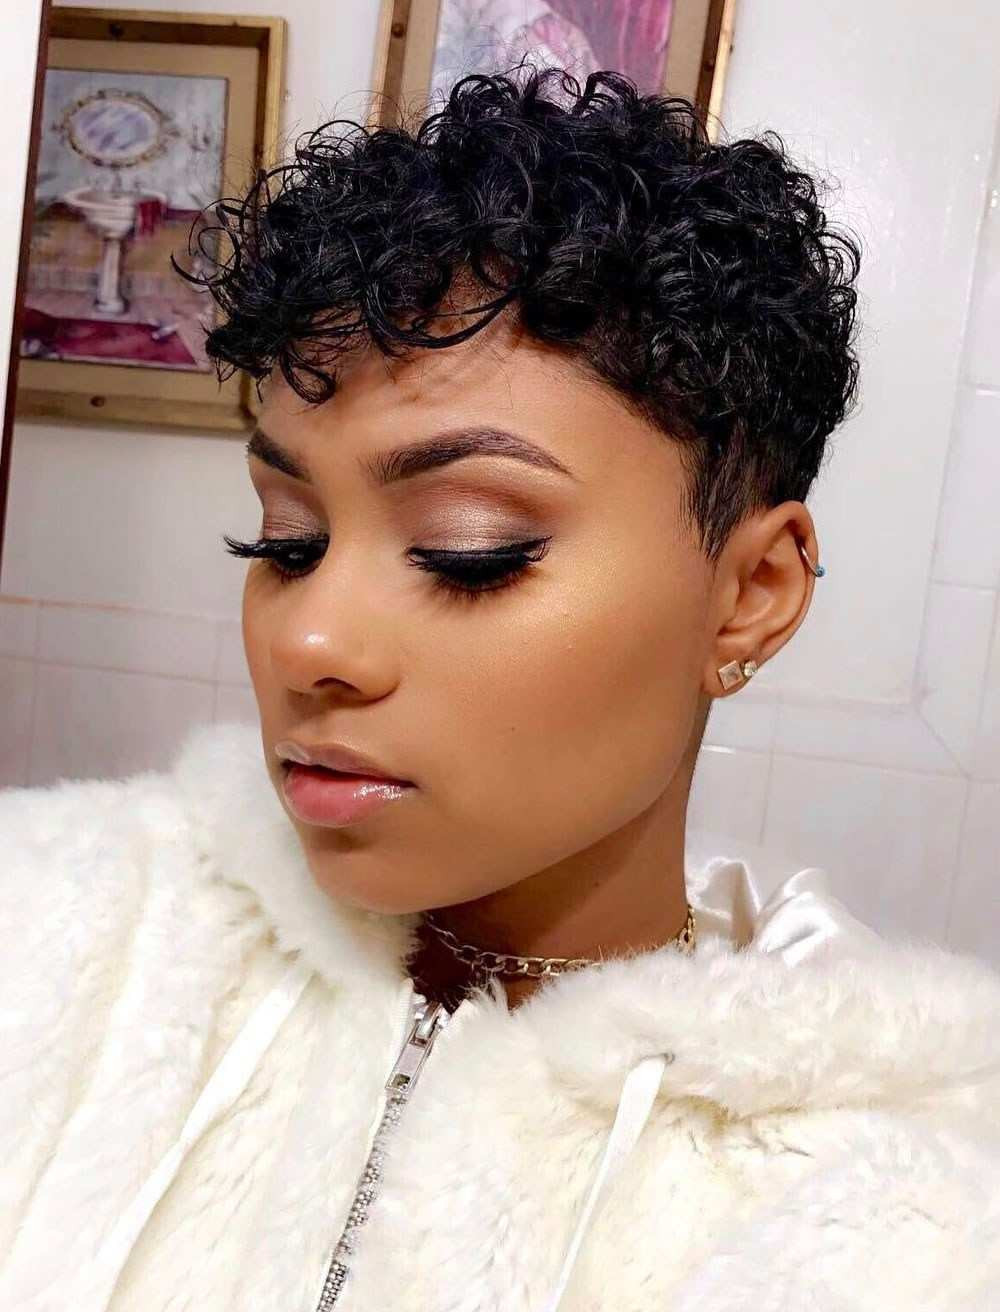 Short Curly Weave Hairstyles For Round Faces
 Short curly weave hairstyles for round faces